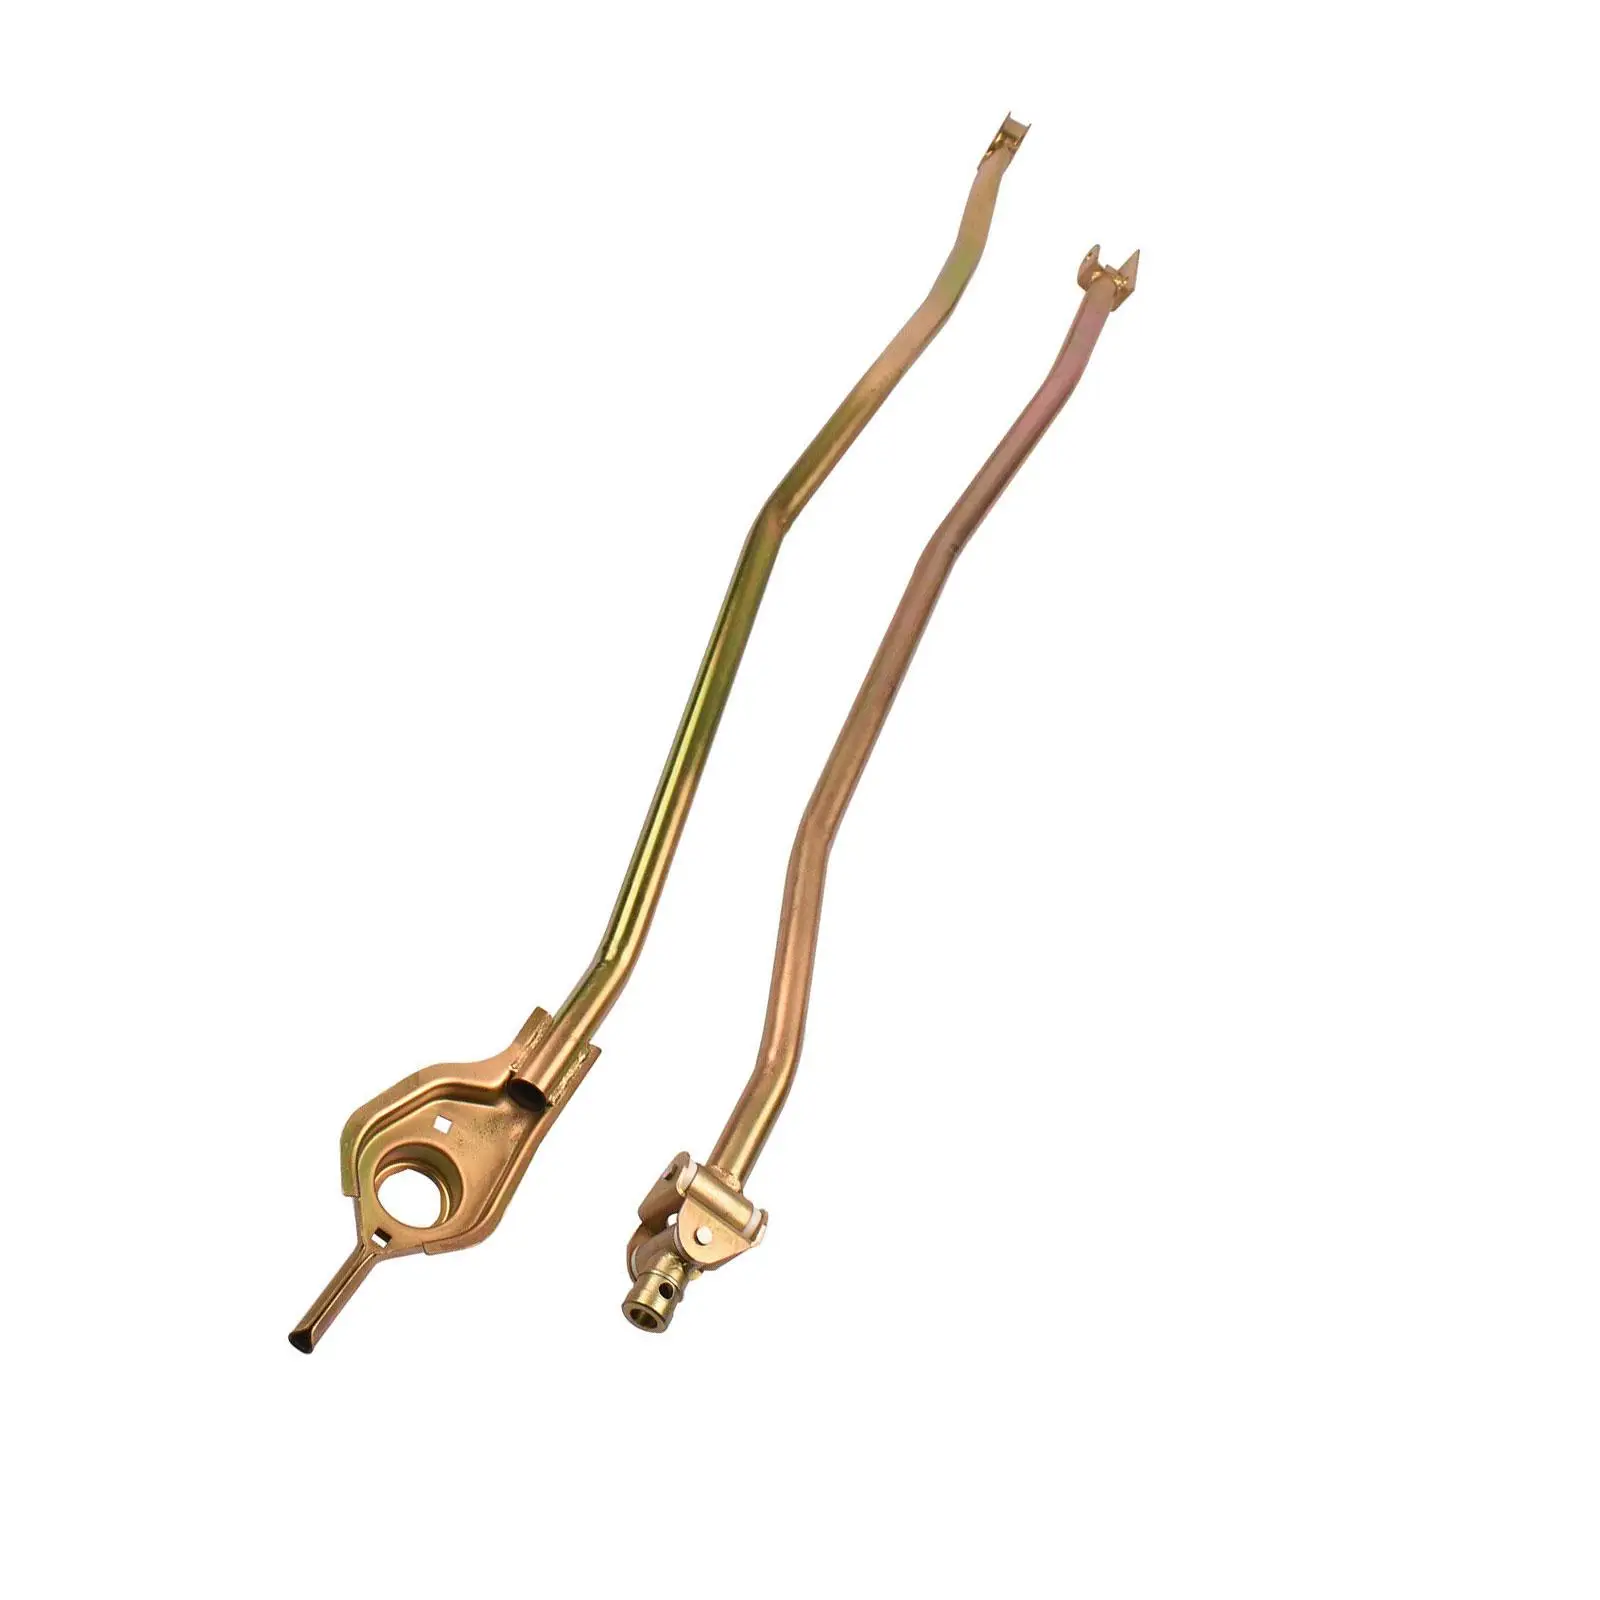 Shift Linkage Egblink for Honda Civic B Series Swap 1992-2000 Replaces Accessories Easy Installation